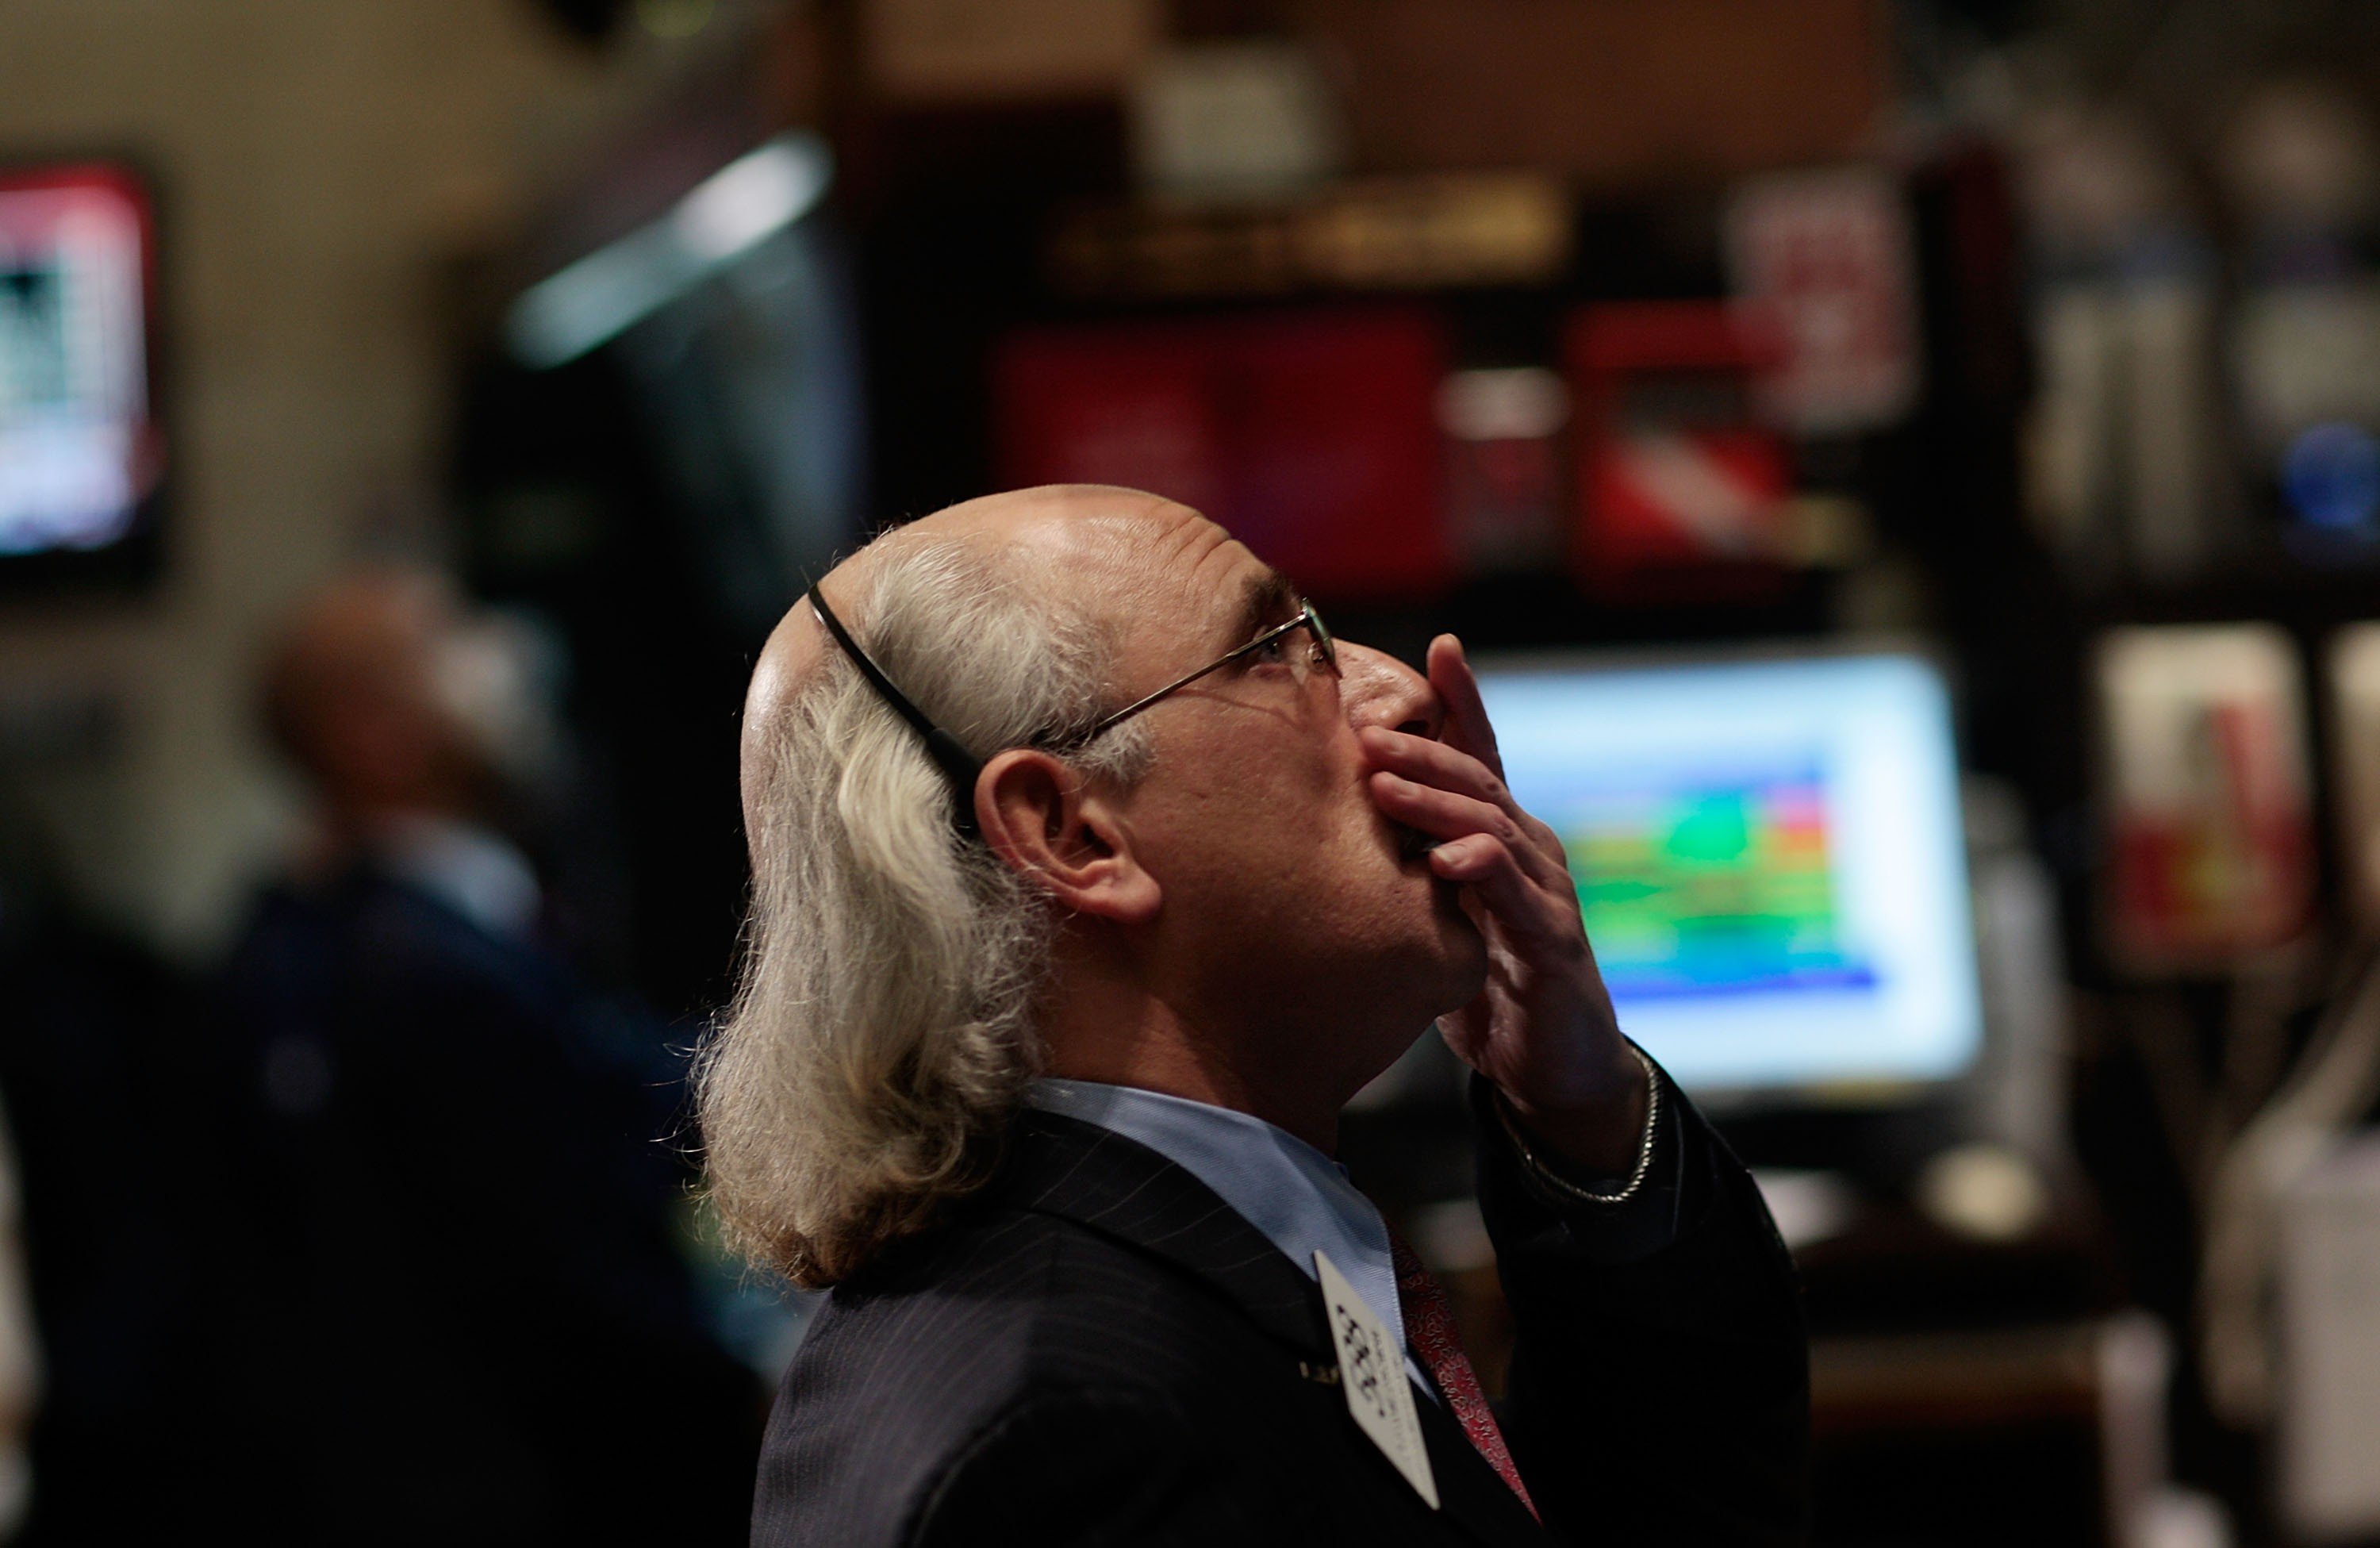 A financial professional reacts to market volatility on the floor of the New York Stock Exchange on March 6, 2009. Photo: AFP